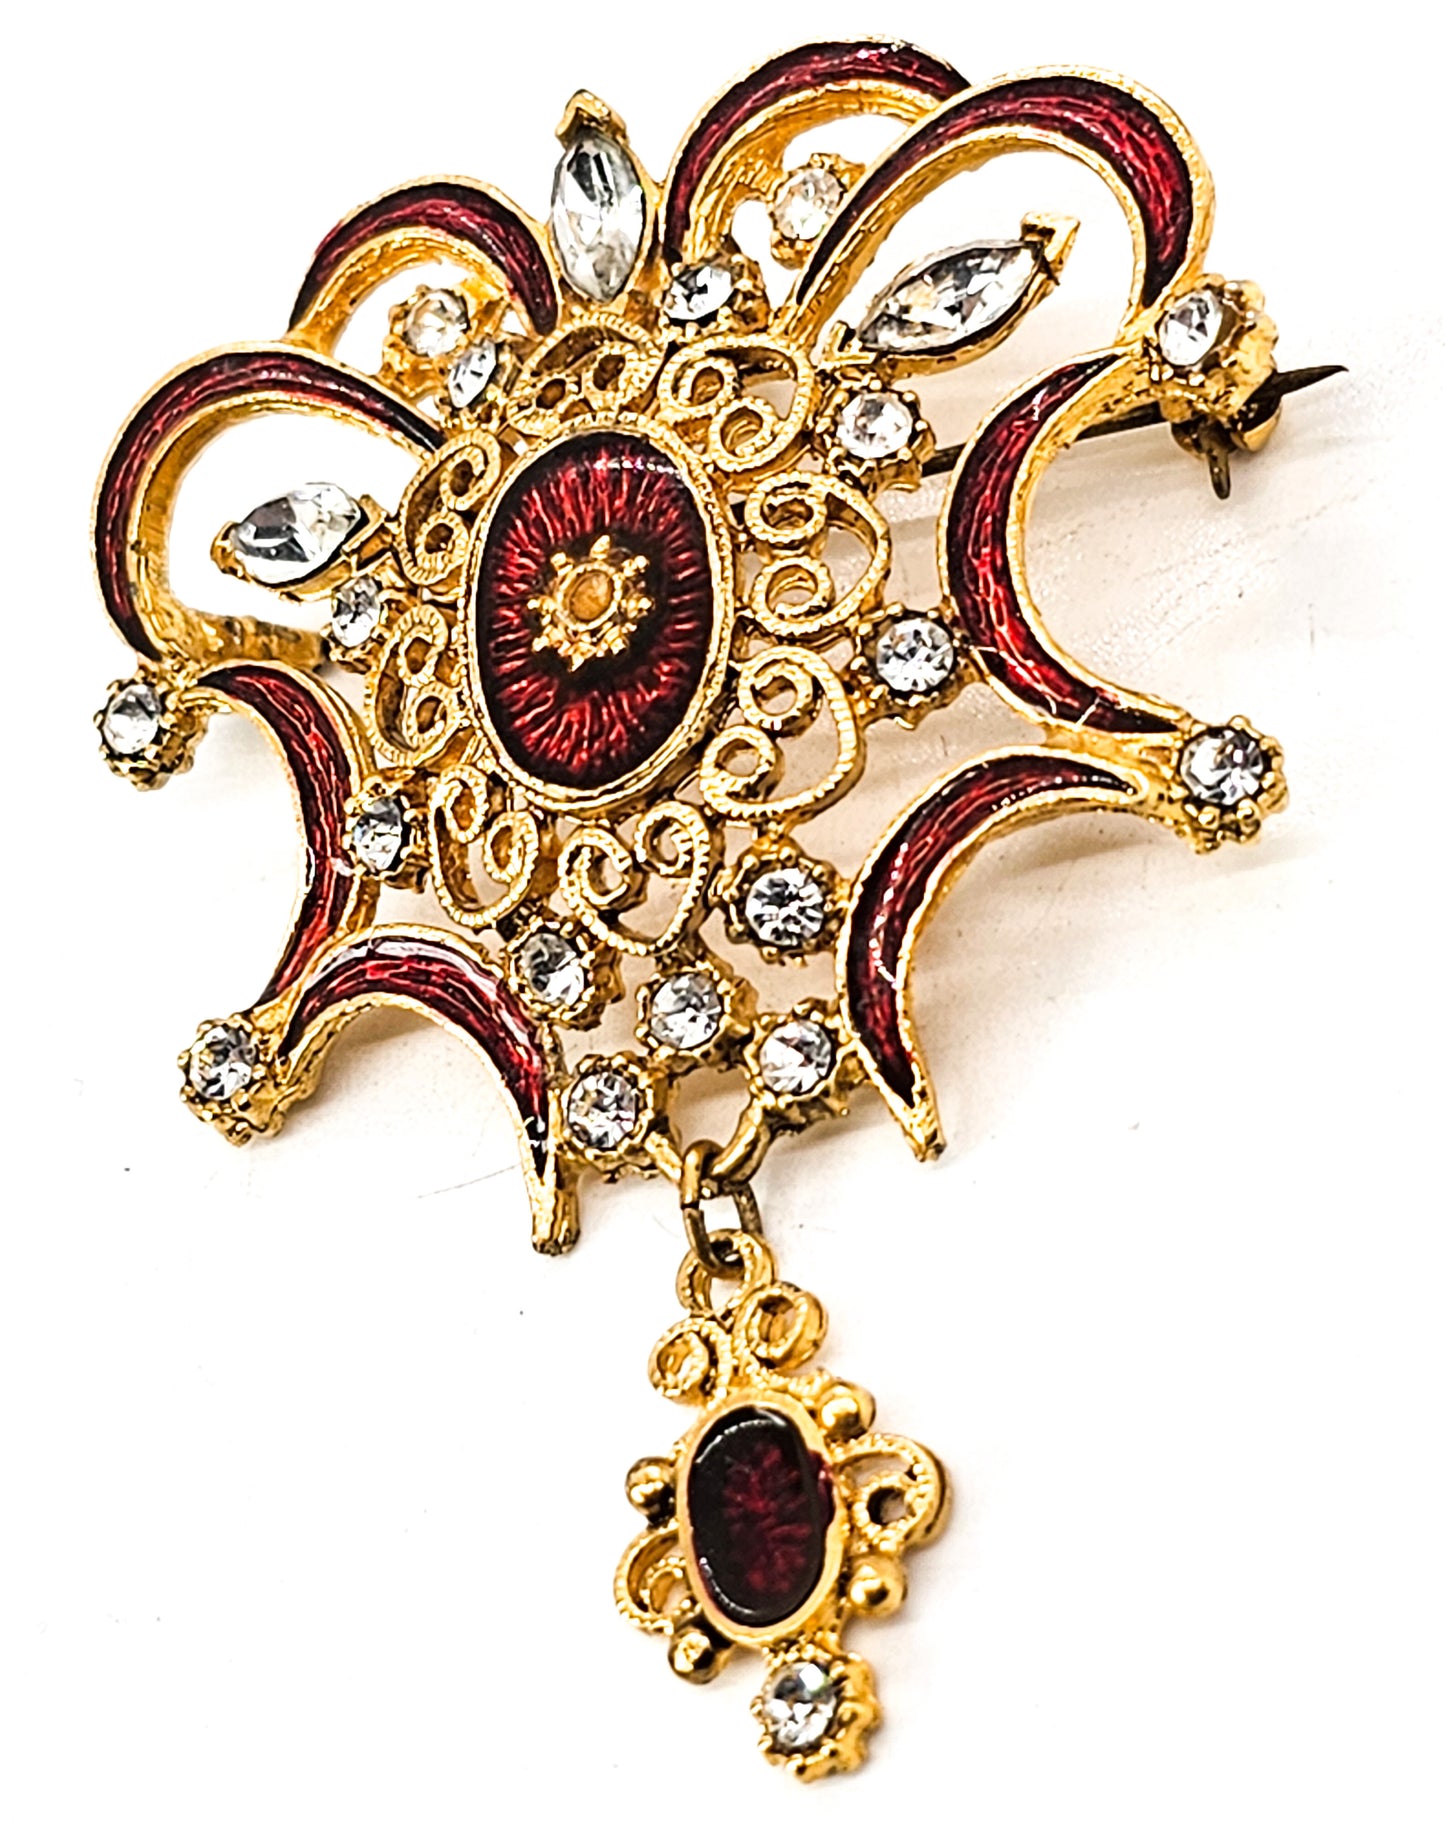 Royal Crown red enamel guilloche and rhinestone vintage pendant brooch